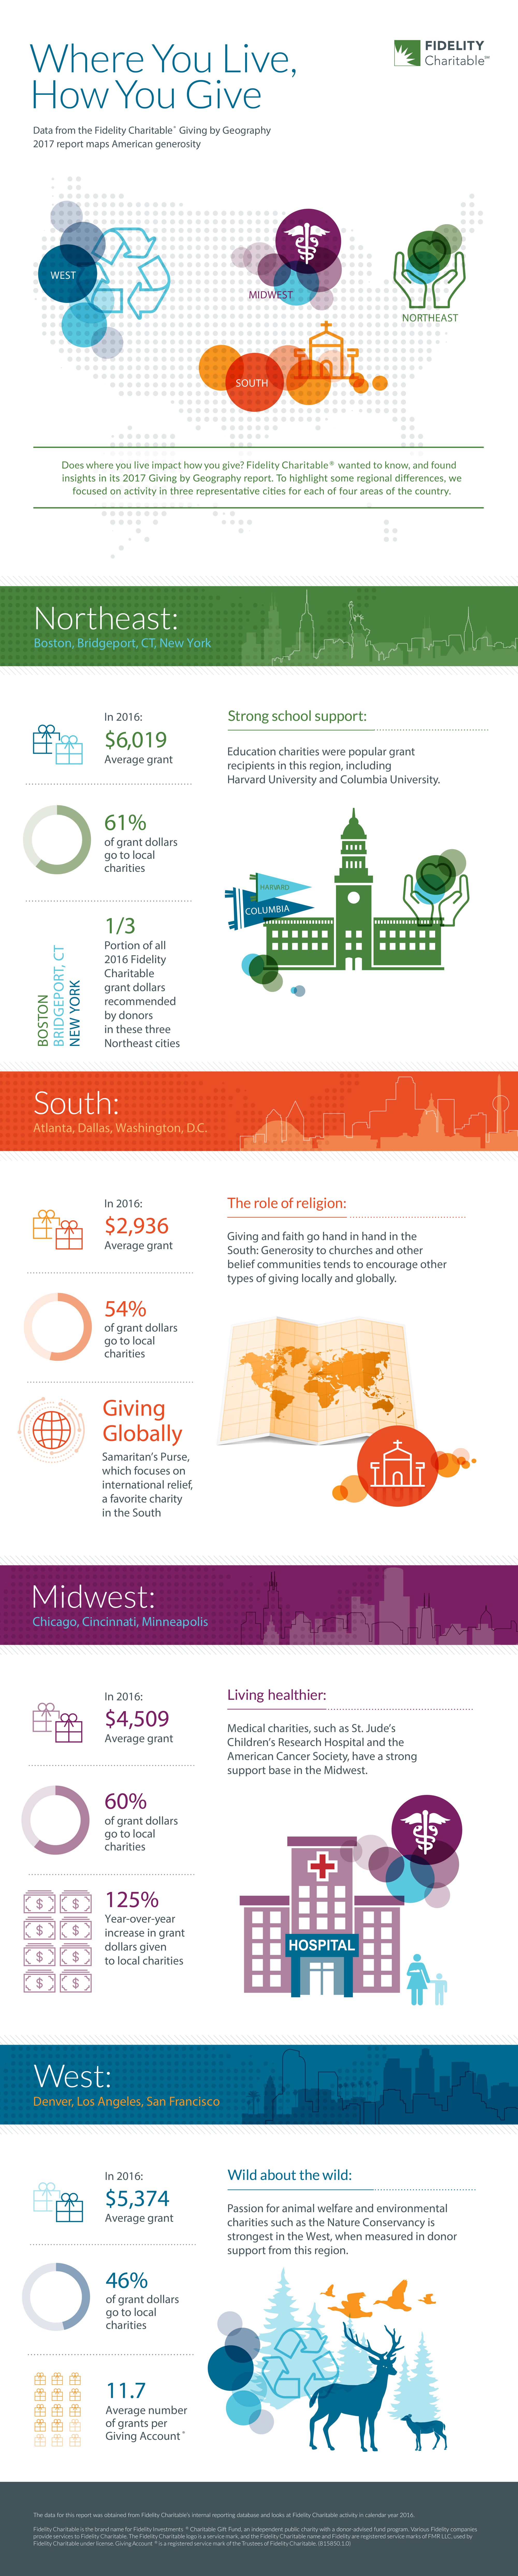 Our infographic provides a visual tour of regional charitable giving trends across the United States.